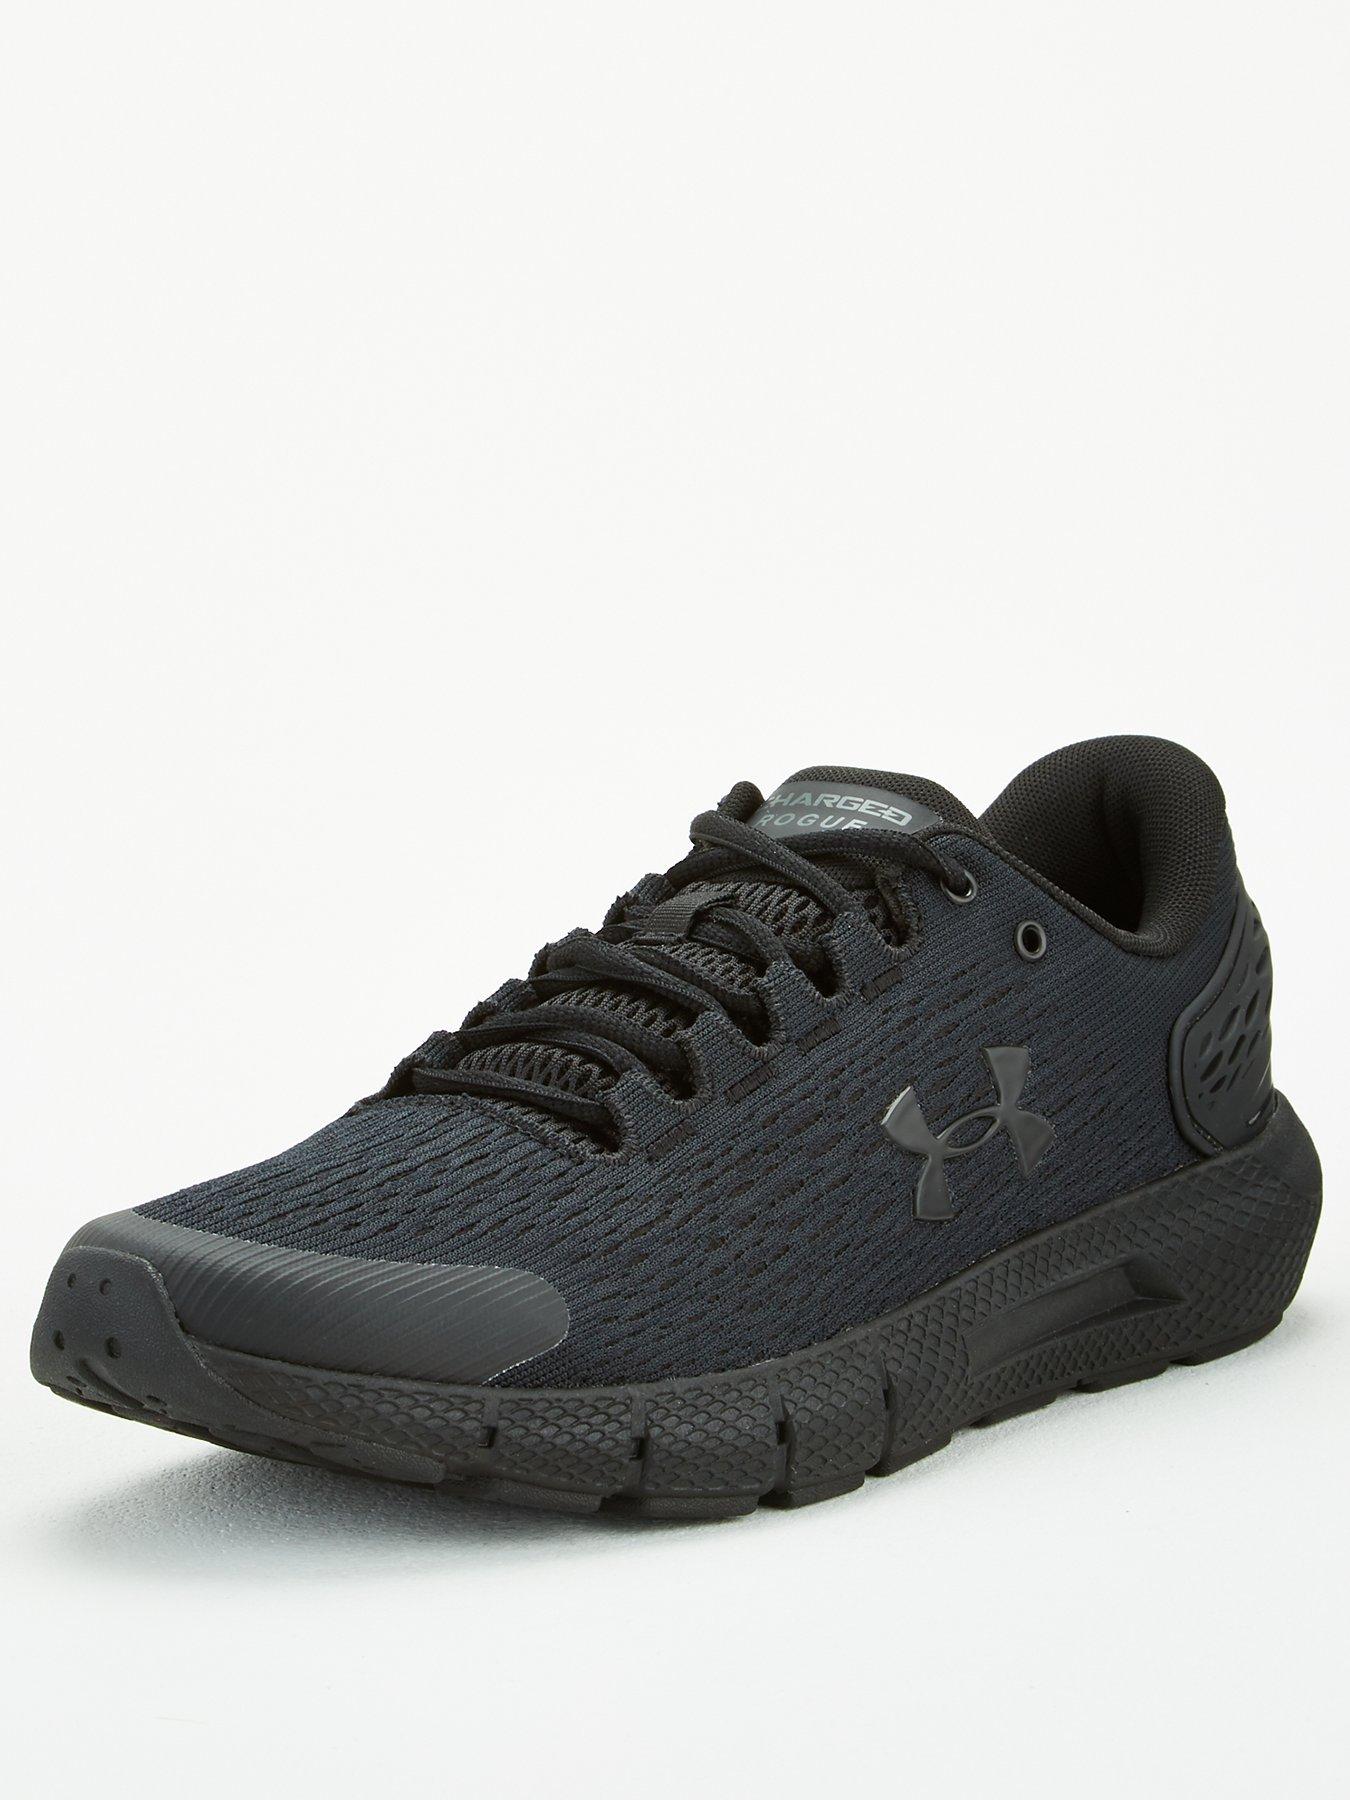 UNDER ARMOUR Charged Rogue 2 - Black 